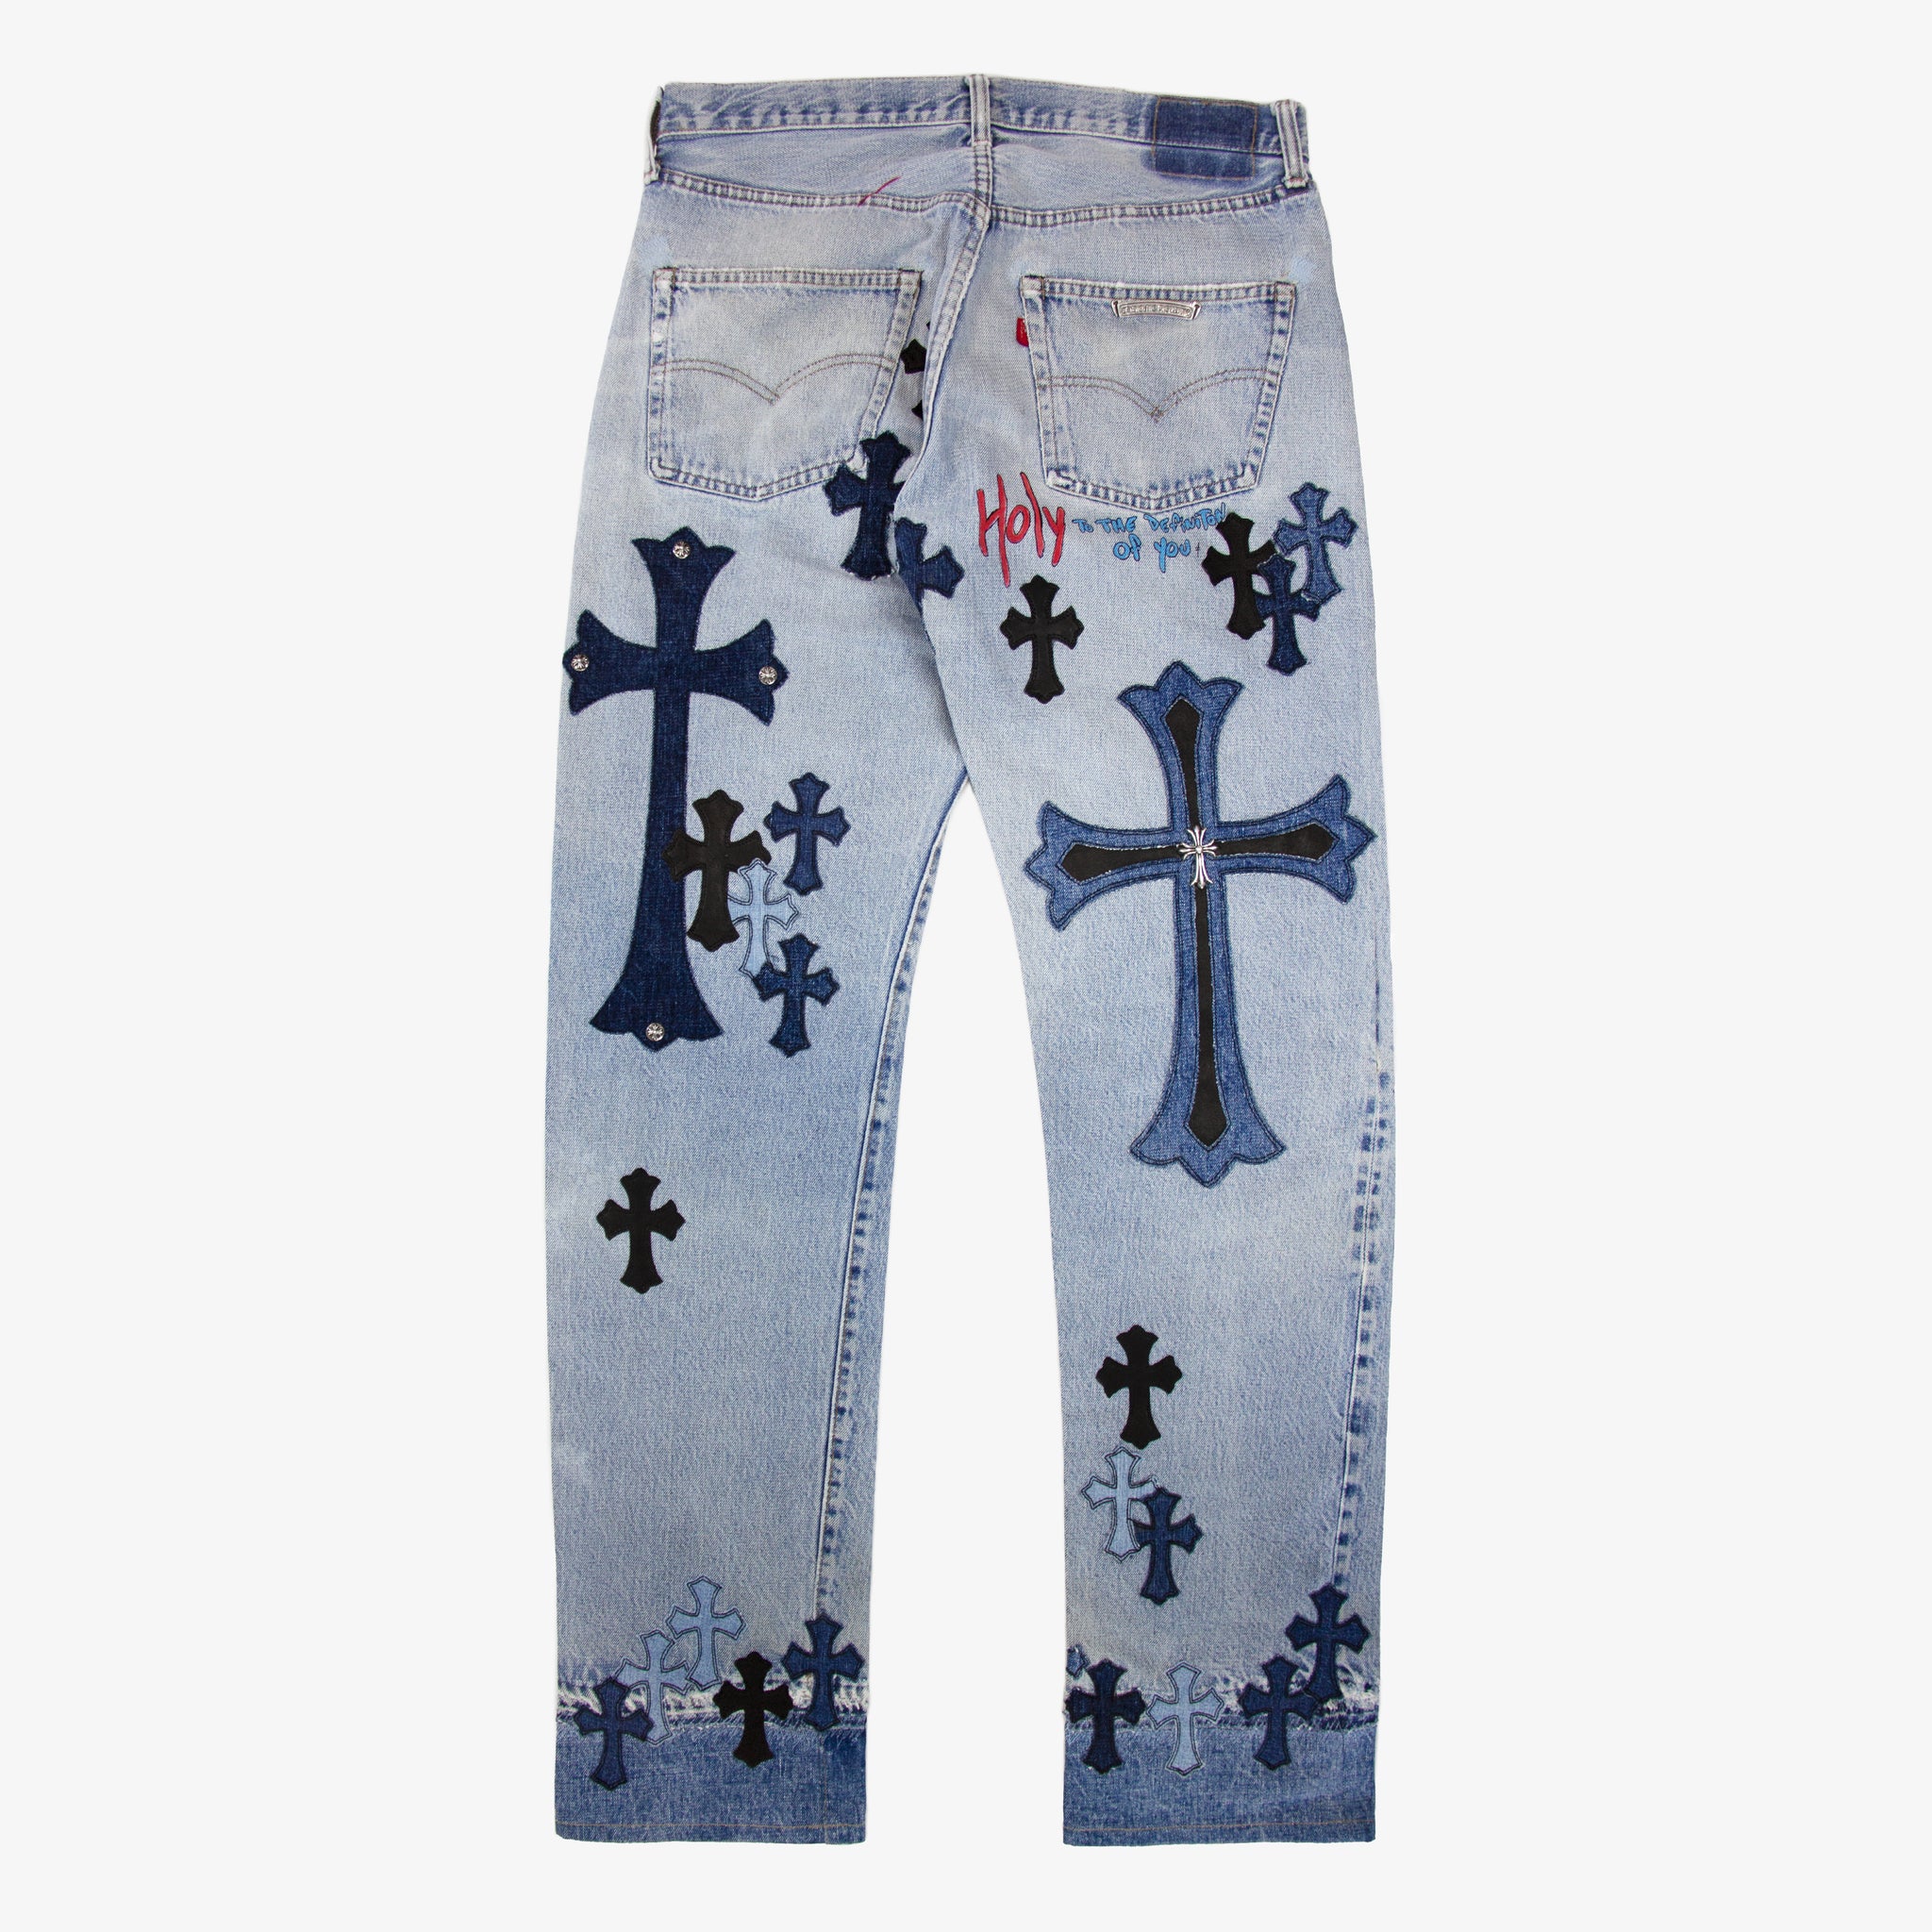 CHROME HEARTS MATTY BOY PATCHES ON PATCHES DENIM (1/1)